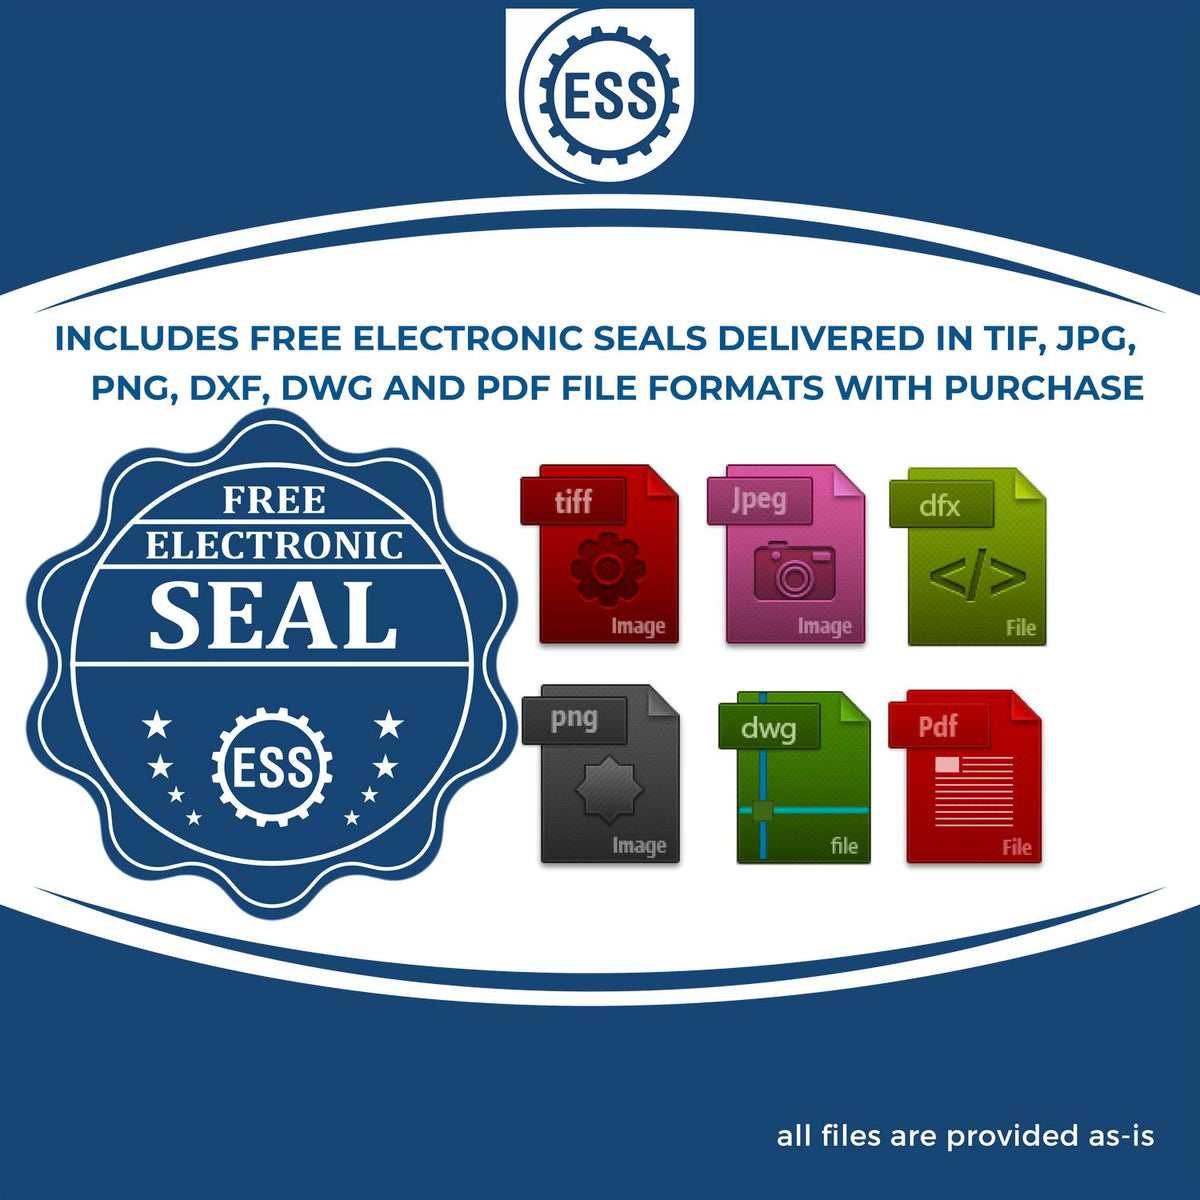 An infographic for the free electronic seal for the Heavy Duty Cast Iron Utah Geologist Seal Embosser illustrating the different file type icons such as DXF, DWG, TIF, JPG and PNG.